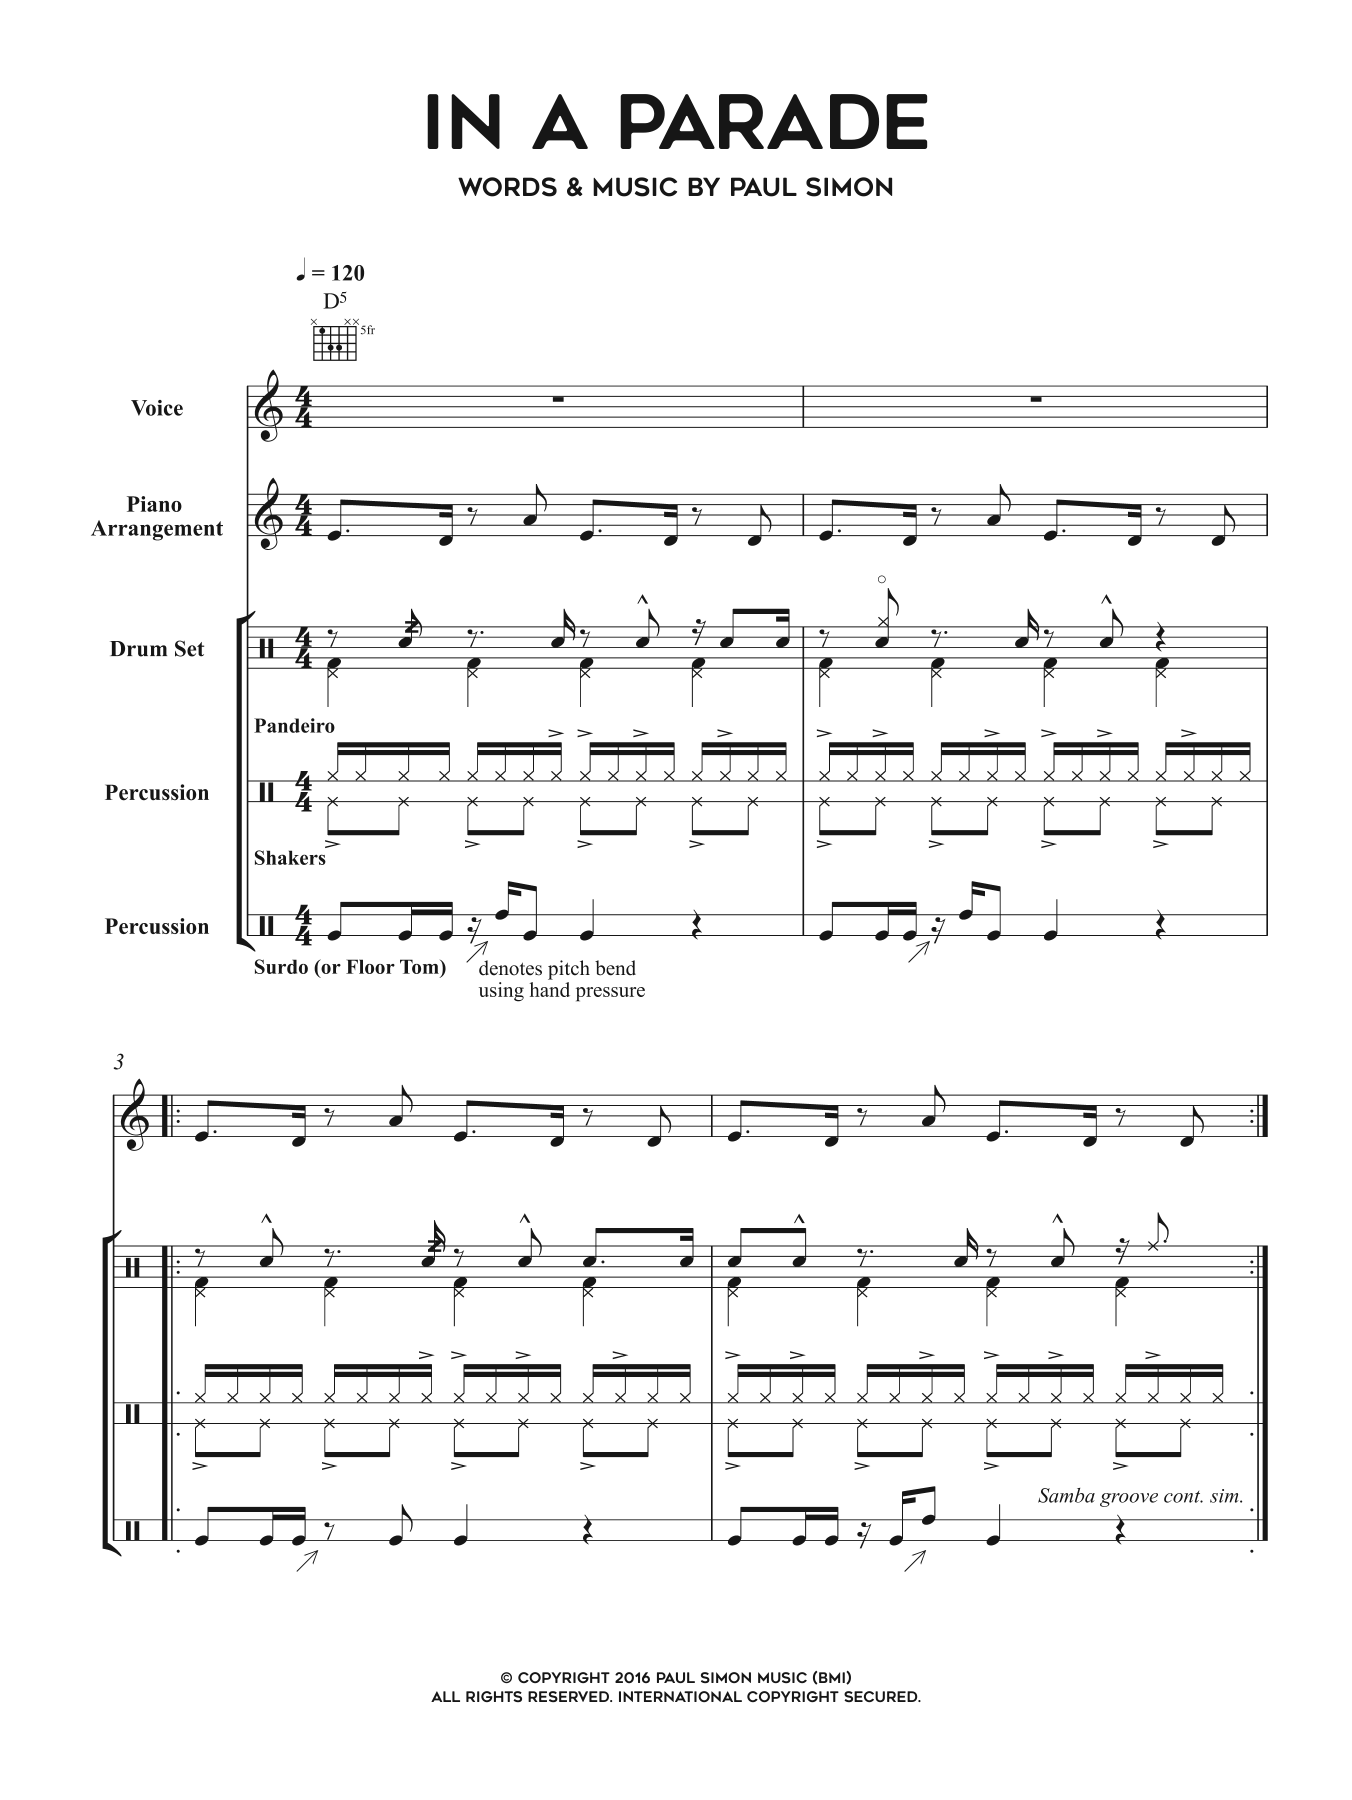 Paul Simon In A Parade sheet music notes and chords. Download Printable PDF.